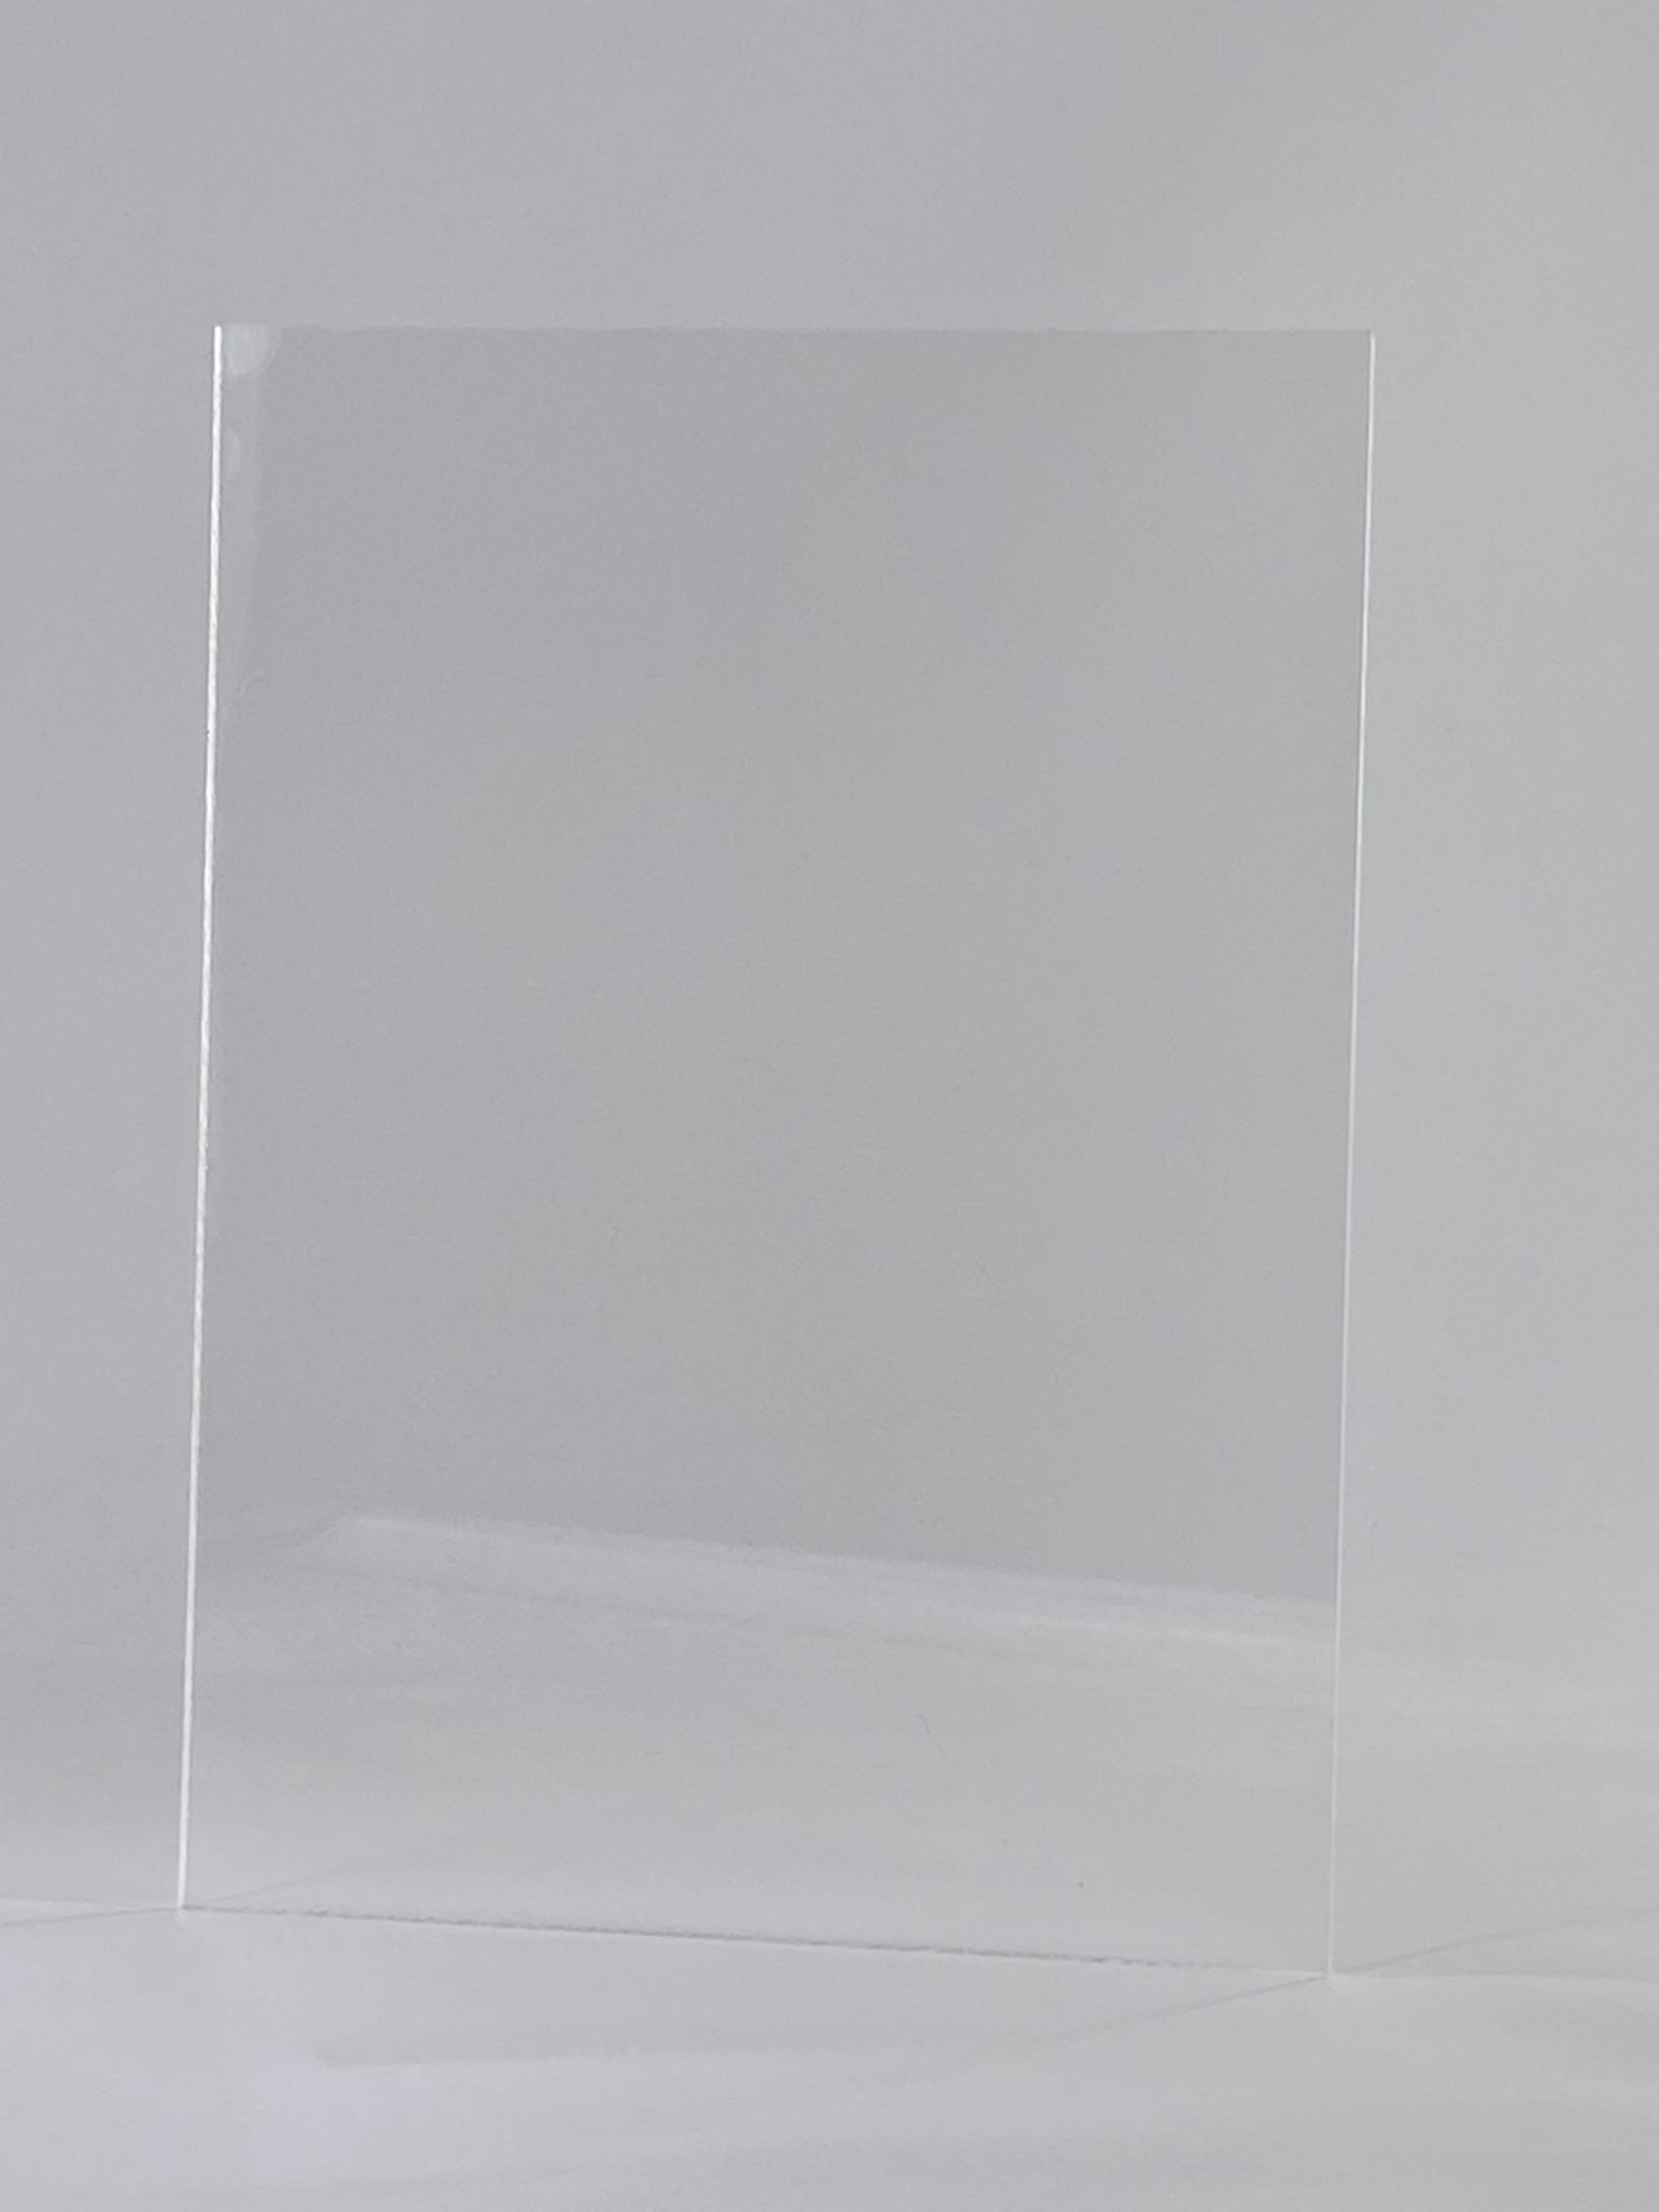 Cast Acrylic Sheet - 24 x 48 - Clear - 3mm Thick - Used in Art  Installations, Models, Display & Signage, Windows, Aquariums, Trophies,  Picture